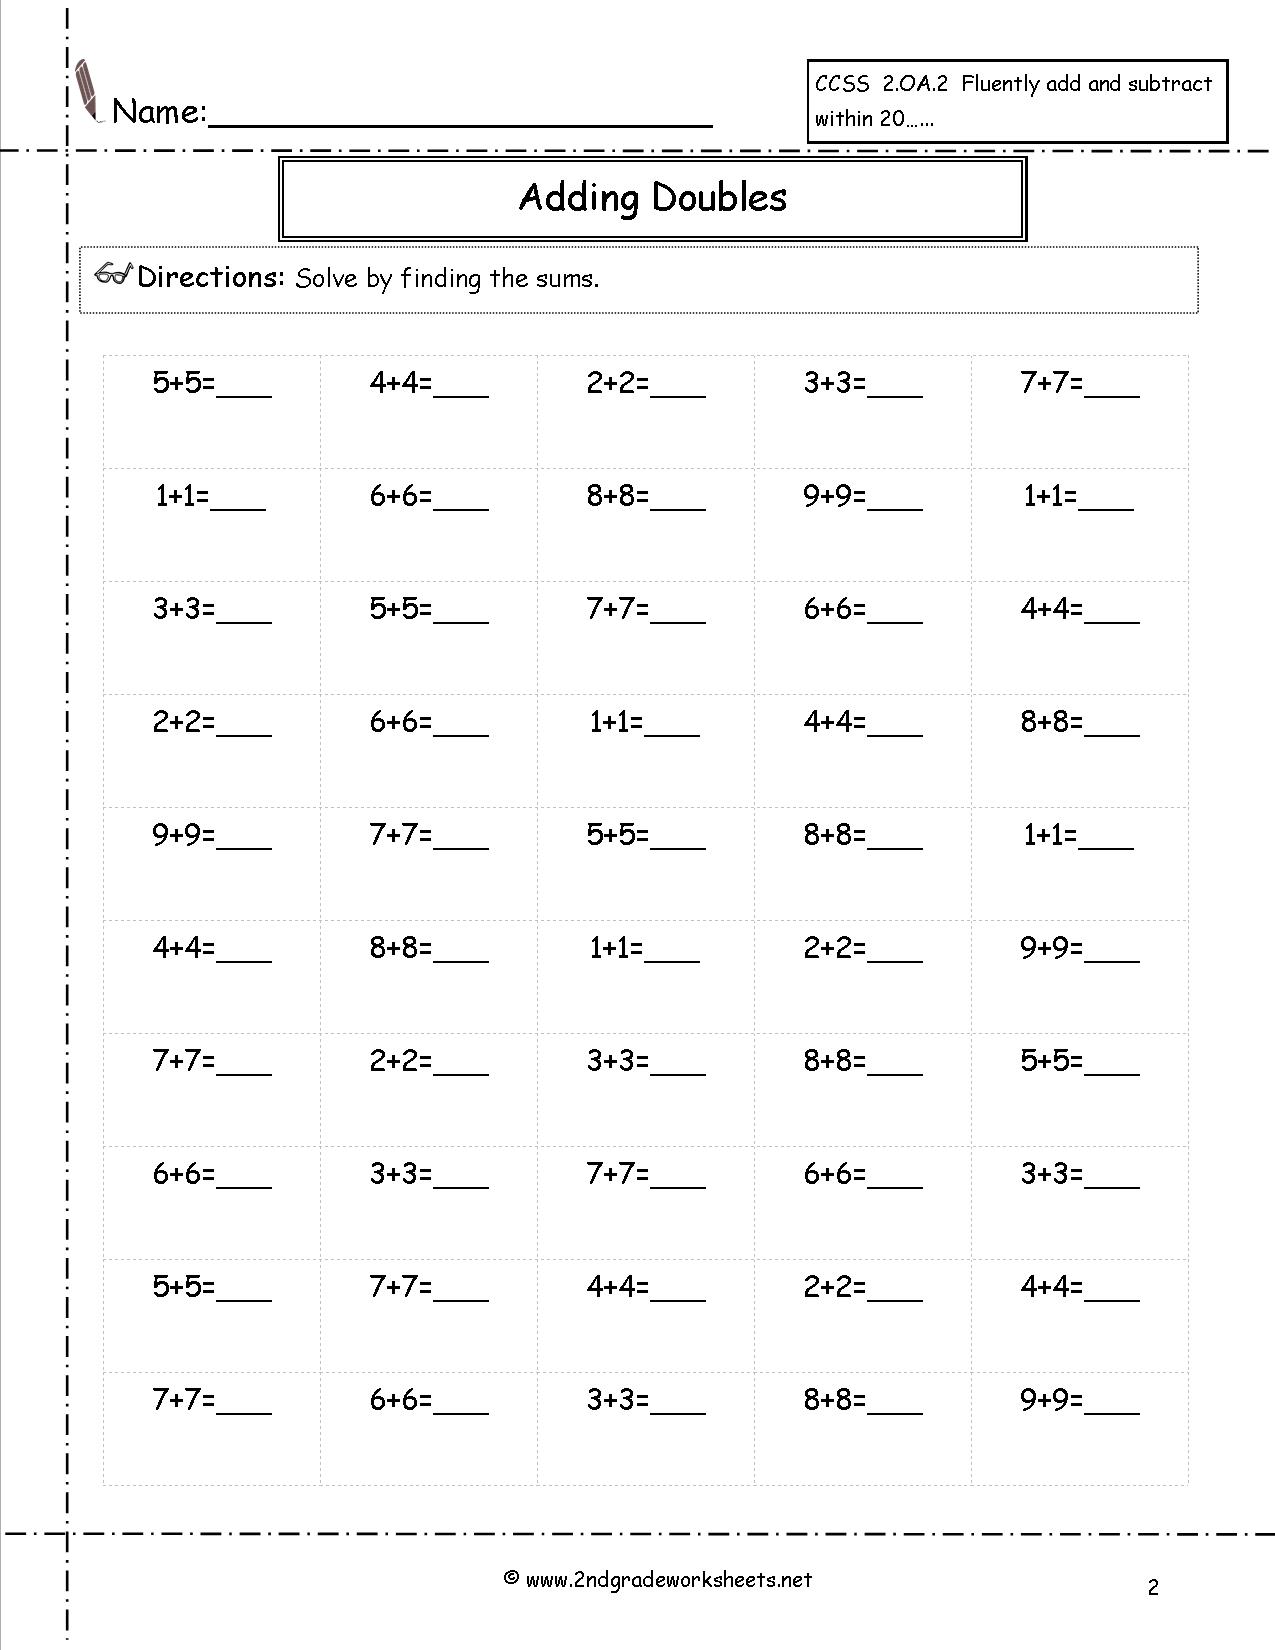 12 Best Images of Minute Math Subtraction Worksheets 2nd ...